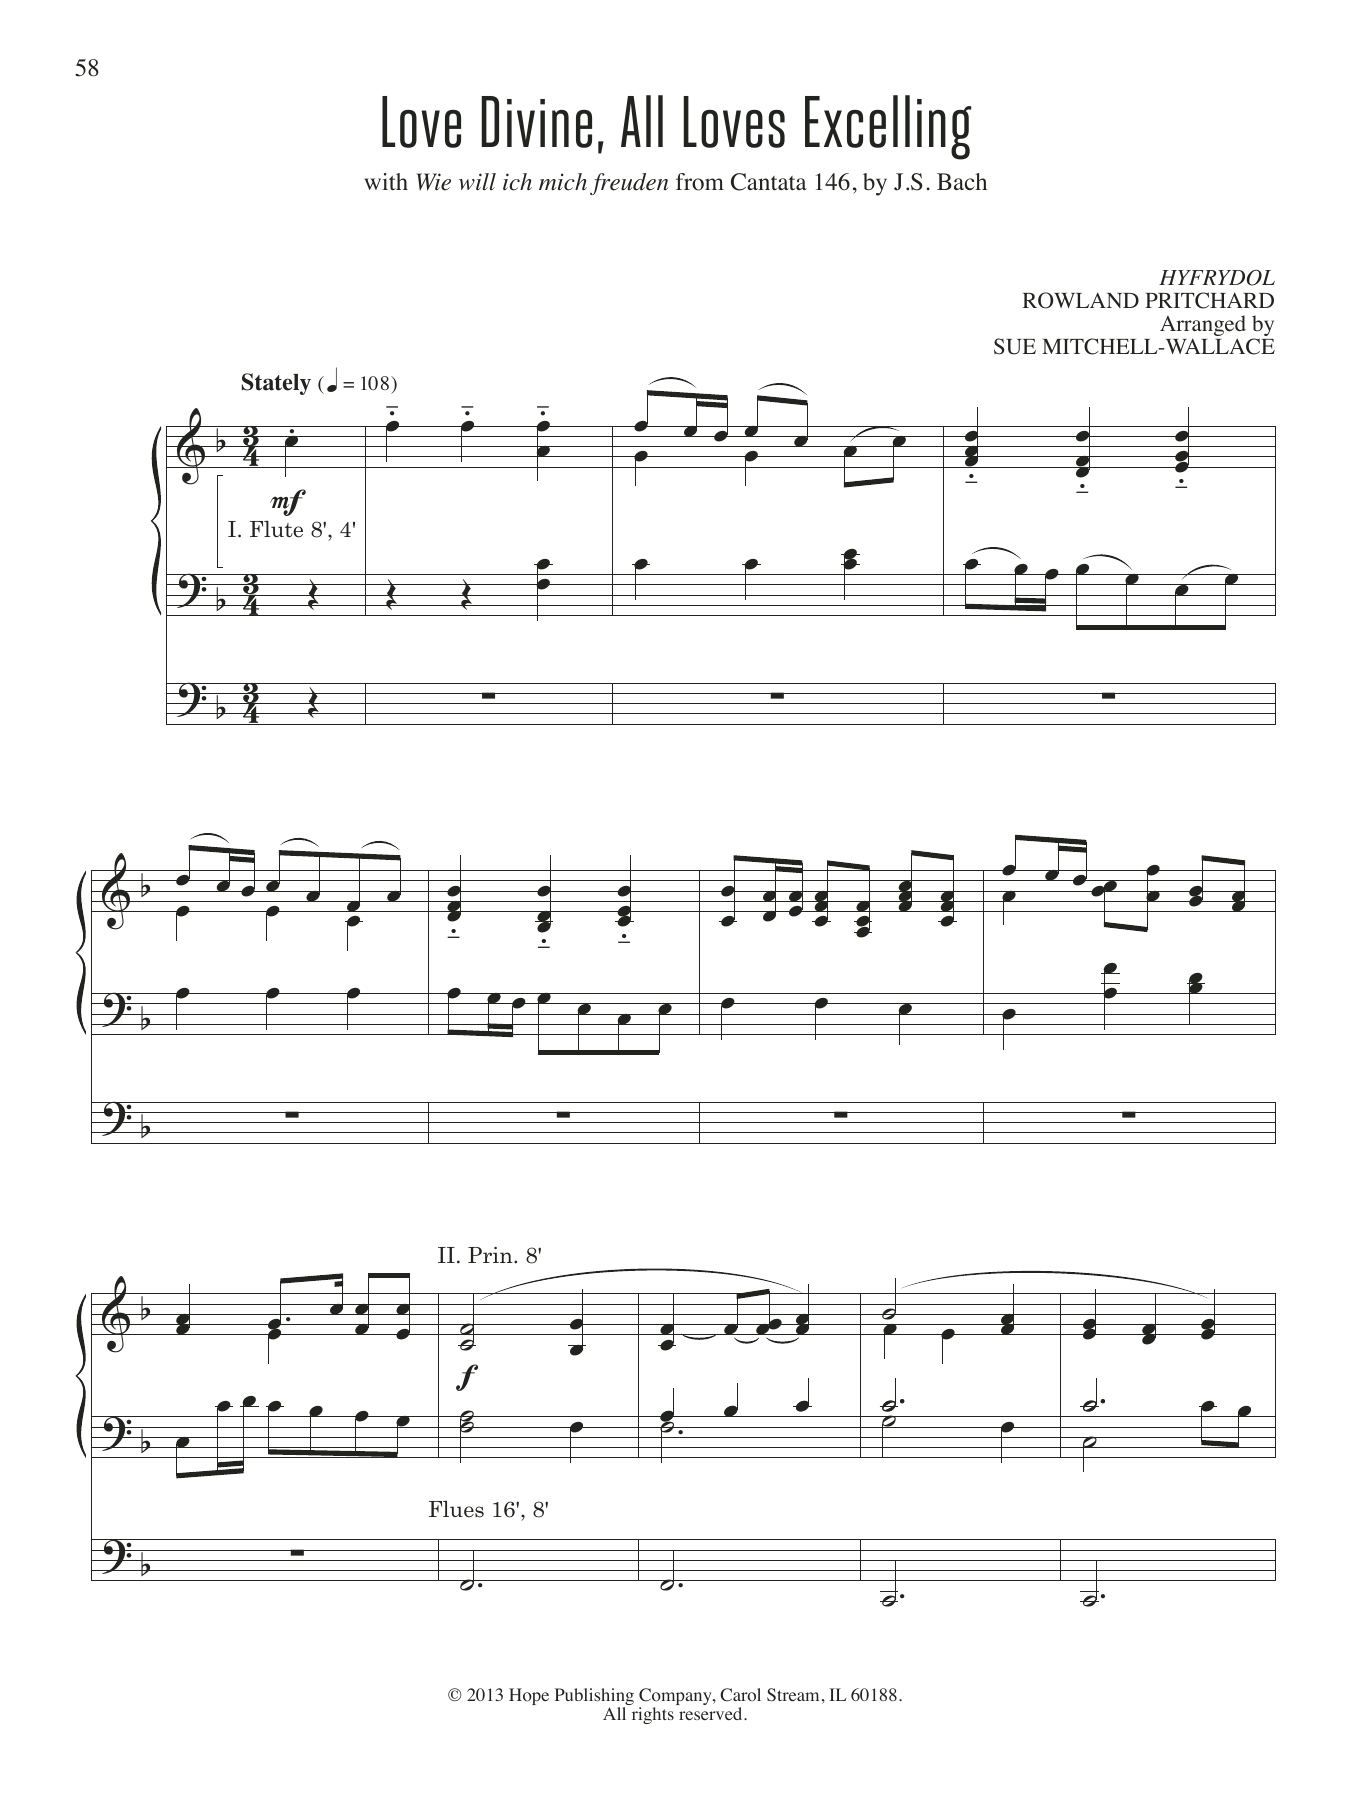 Download Sue Mitchell-Wallace Love Divine, All Loves Excelling Sheet Music